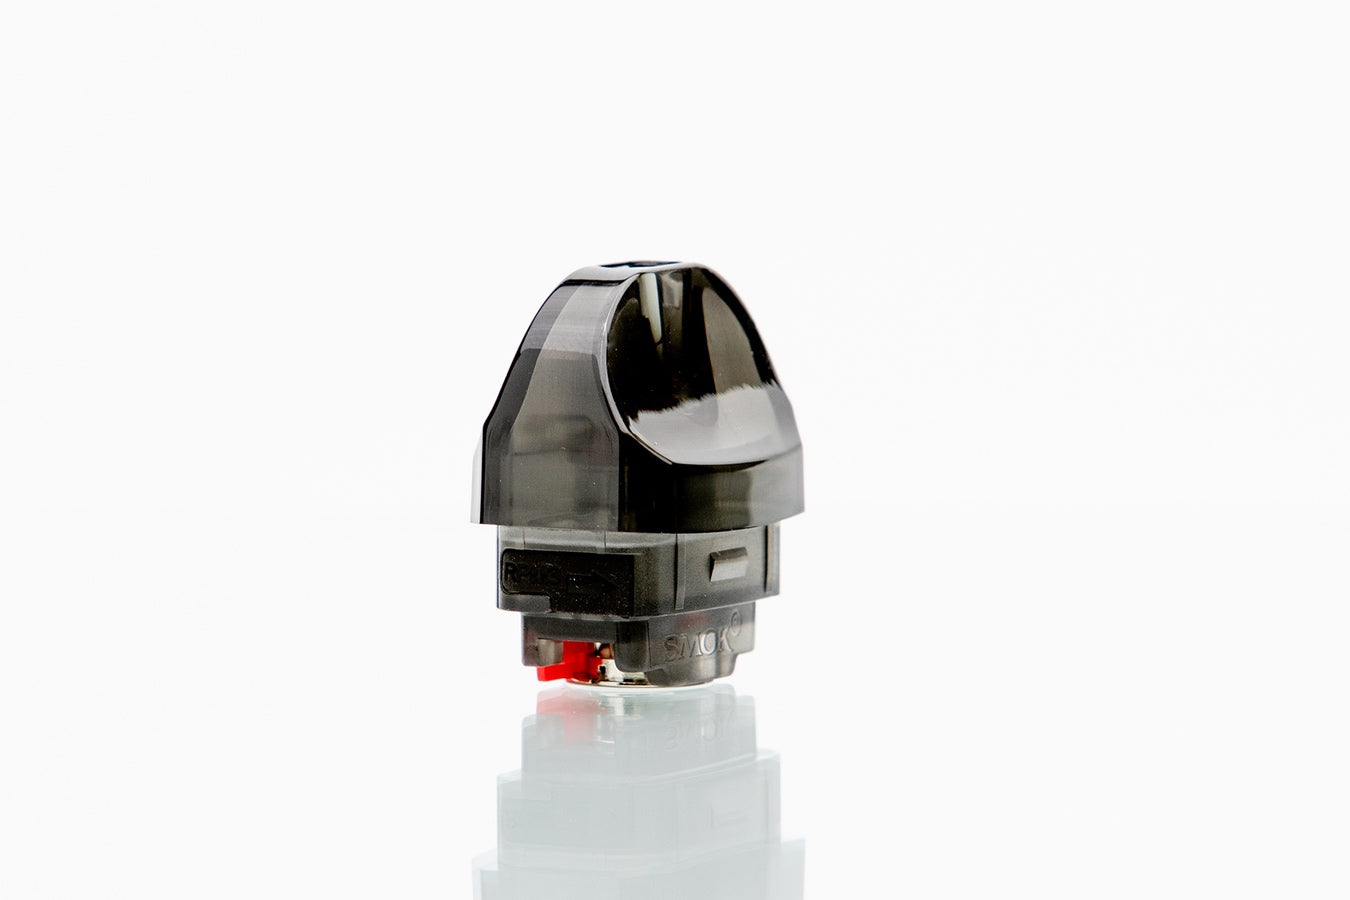 Pod with coil locking system visible for SMOK Nord 5 device